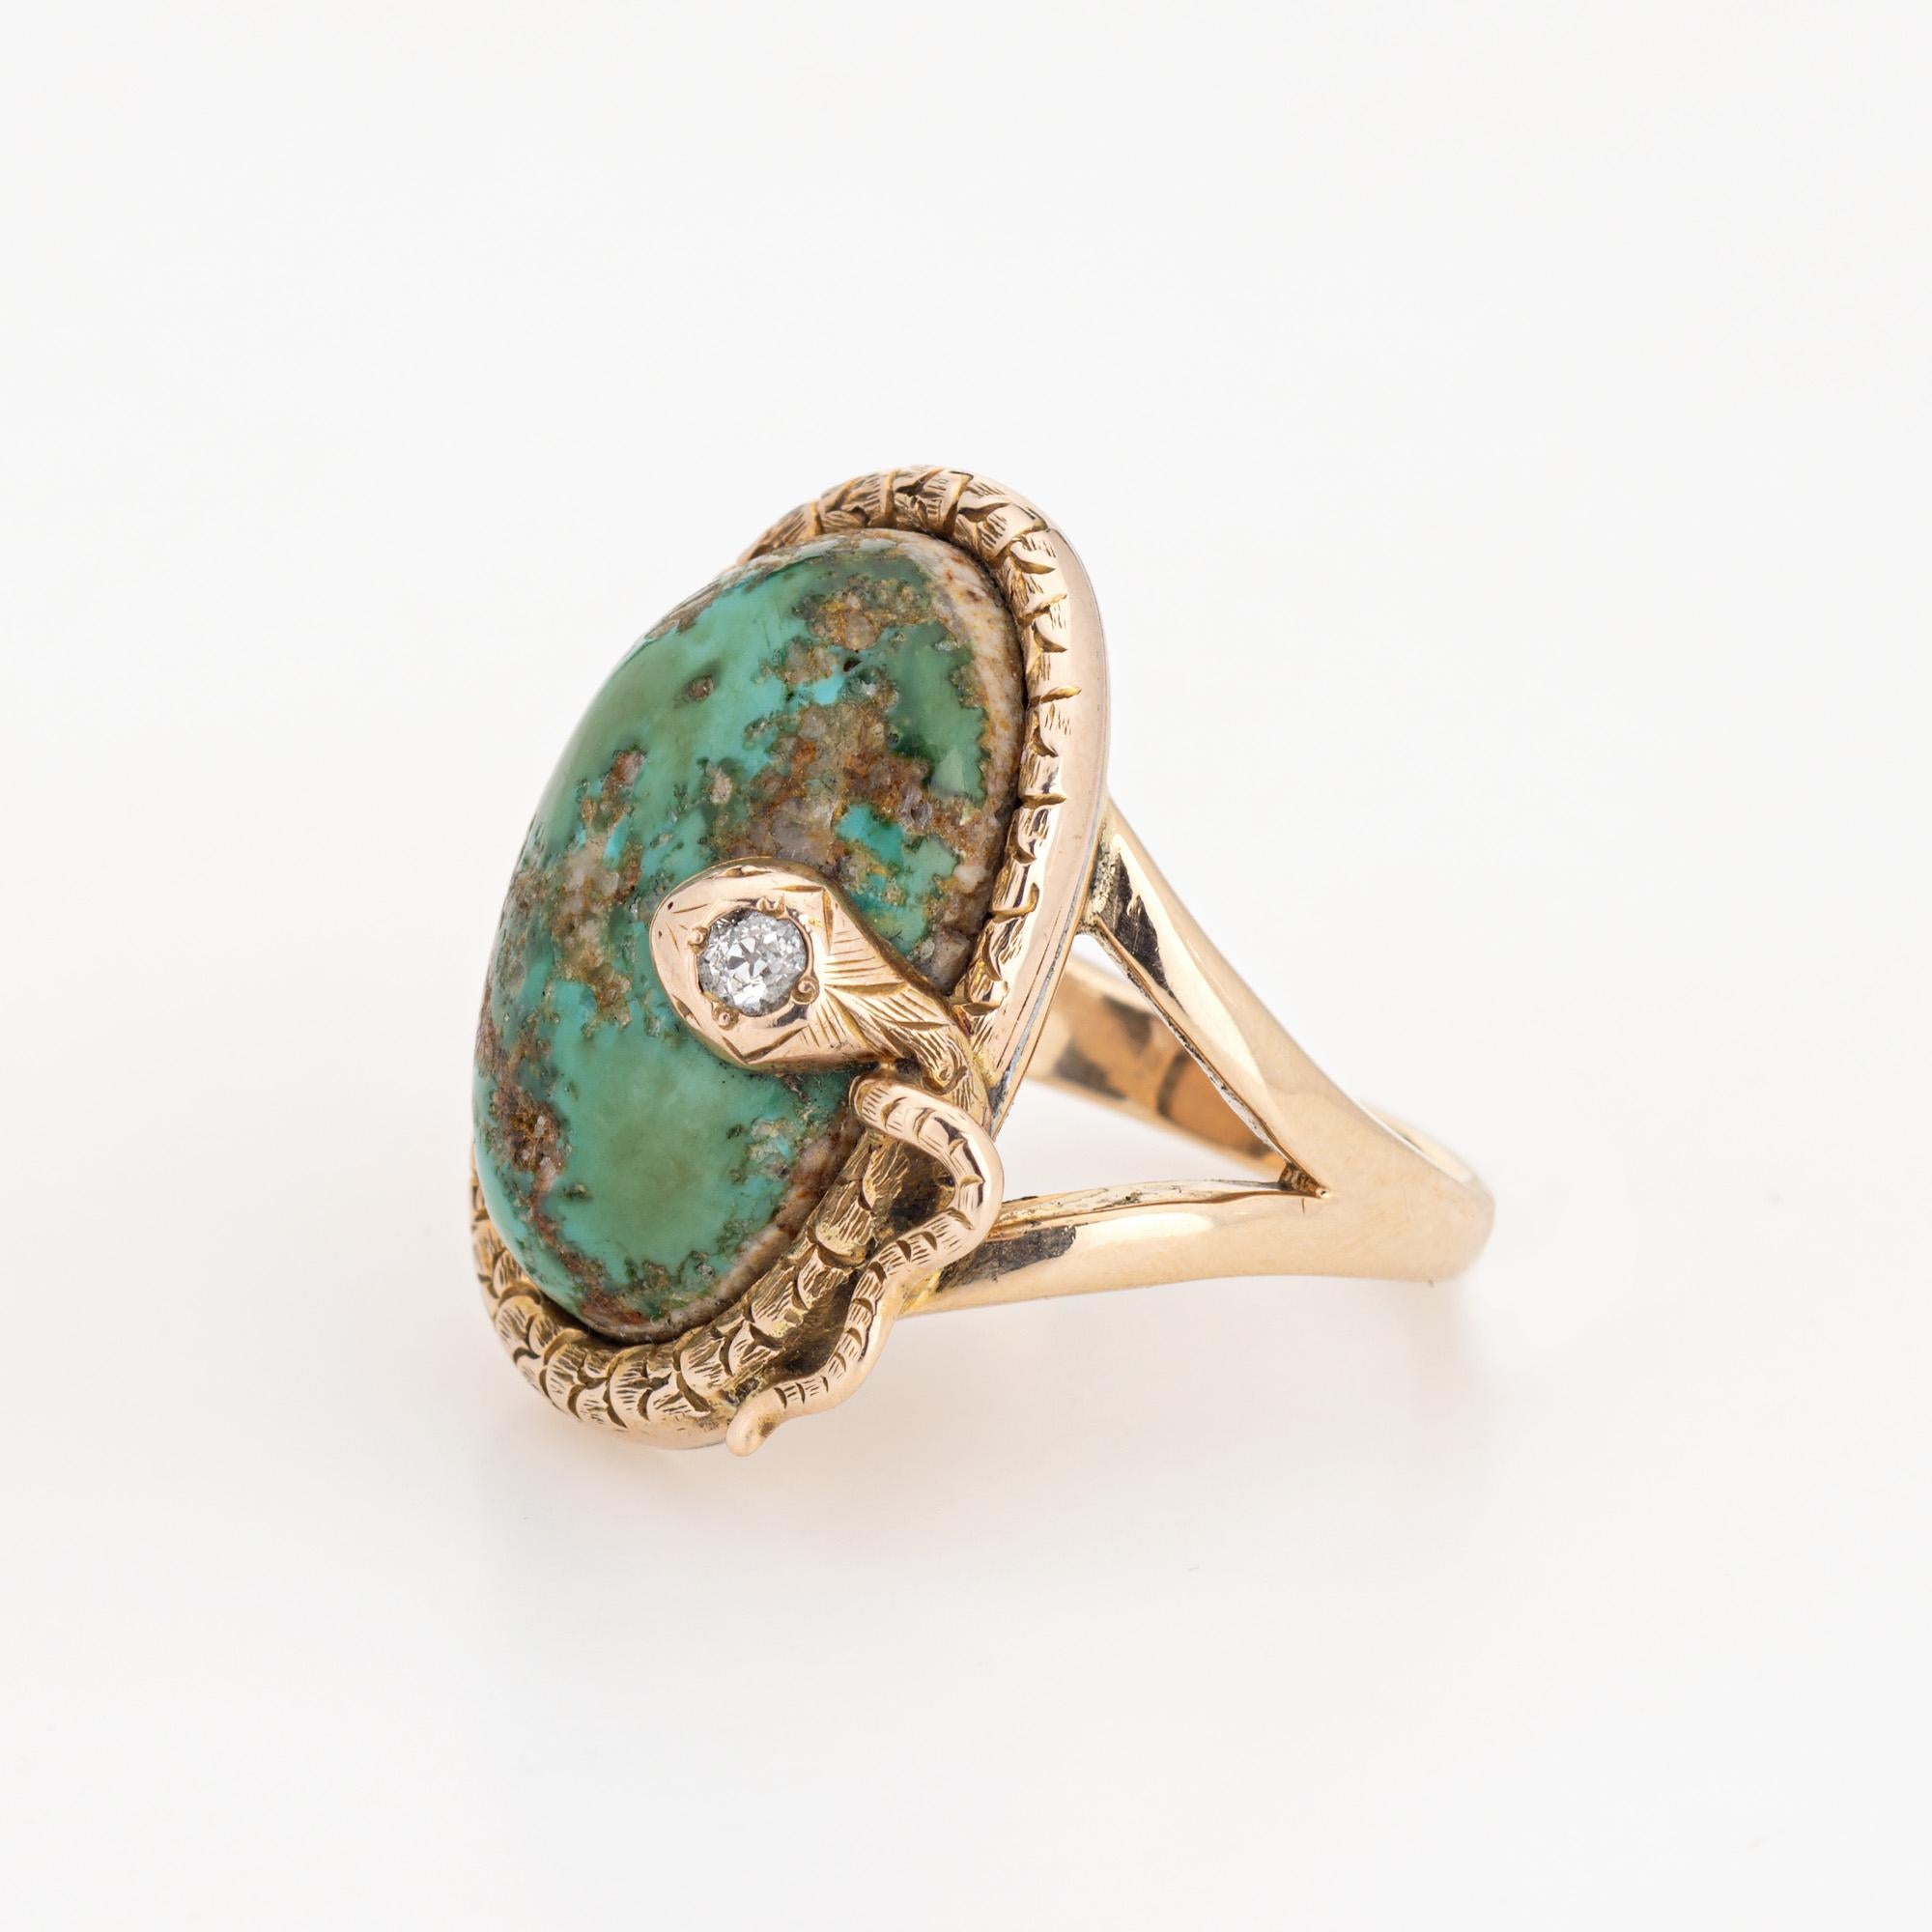 Antique Victorian Snake Ring Turquoise Diamond 7 Large Cocktail Serpent Jewelry In Good Condition For Sale In Torrance, CA